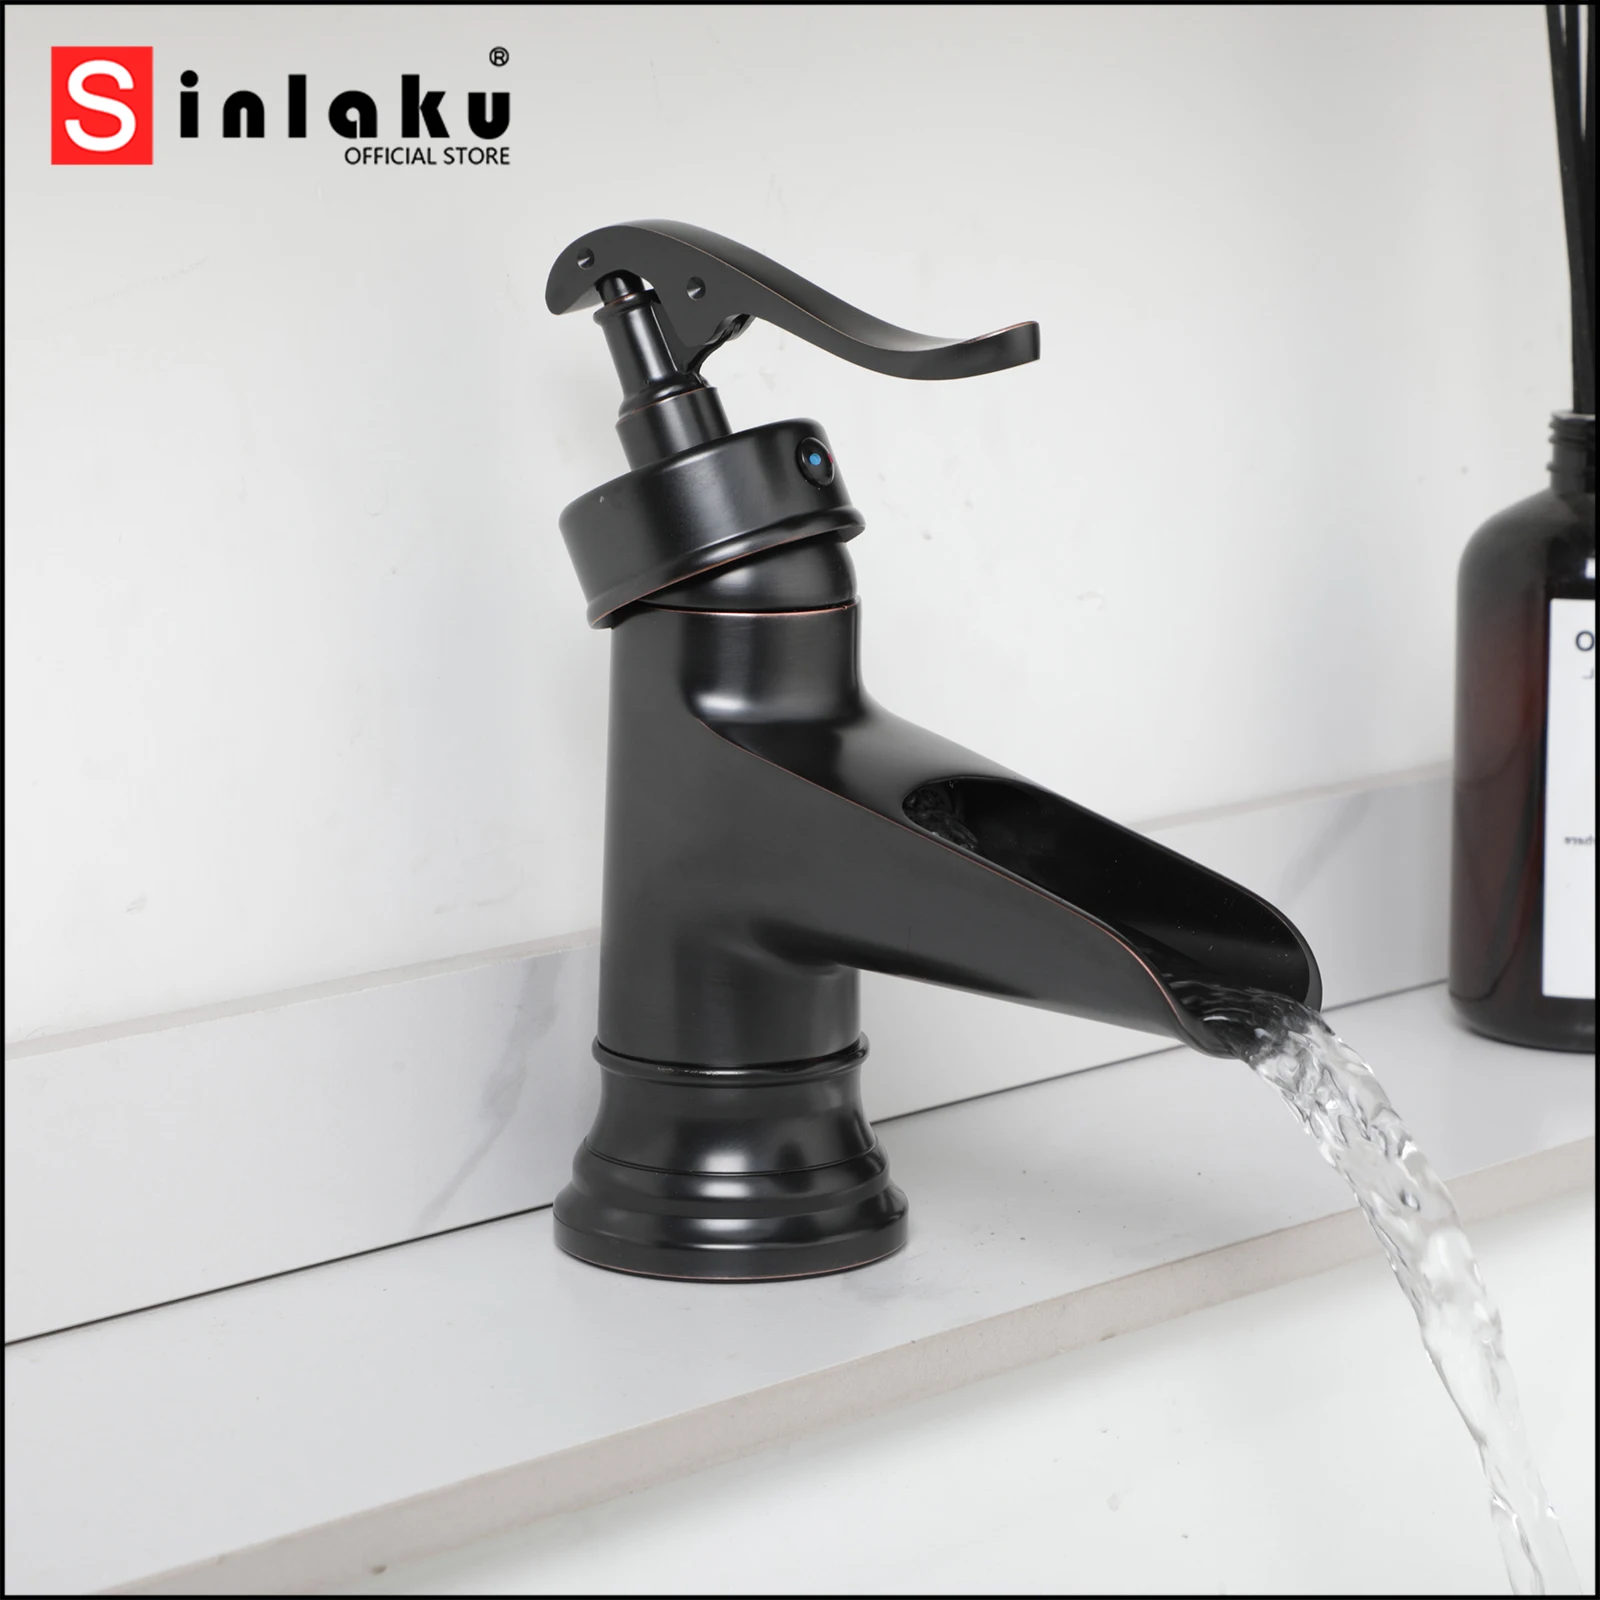 

SINLAKU ORB Black Bathroom Basin Faucet Deck Mounted Single Handle Control Waterfall outlet With Hot And Cold Water Mixer Taps